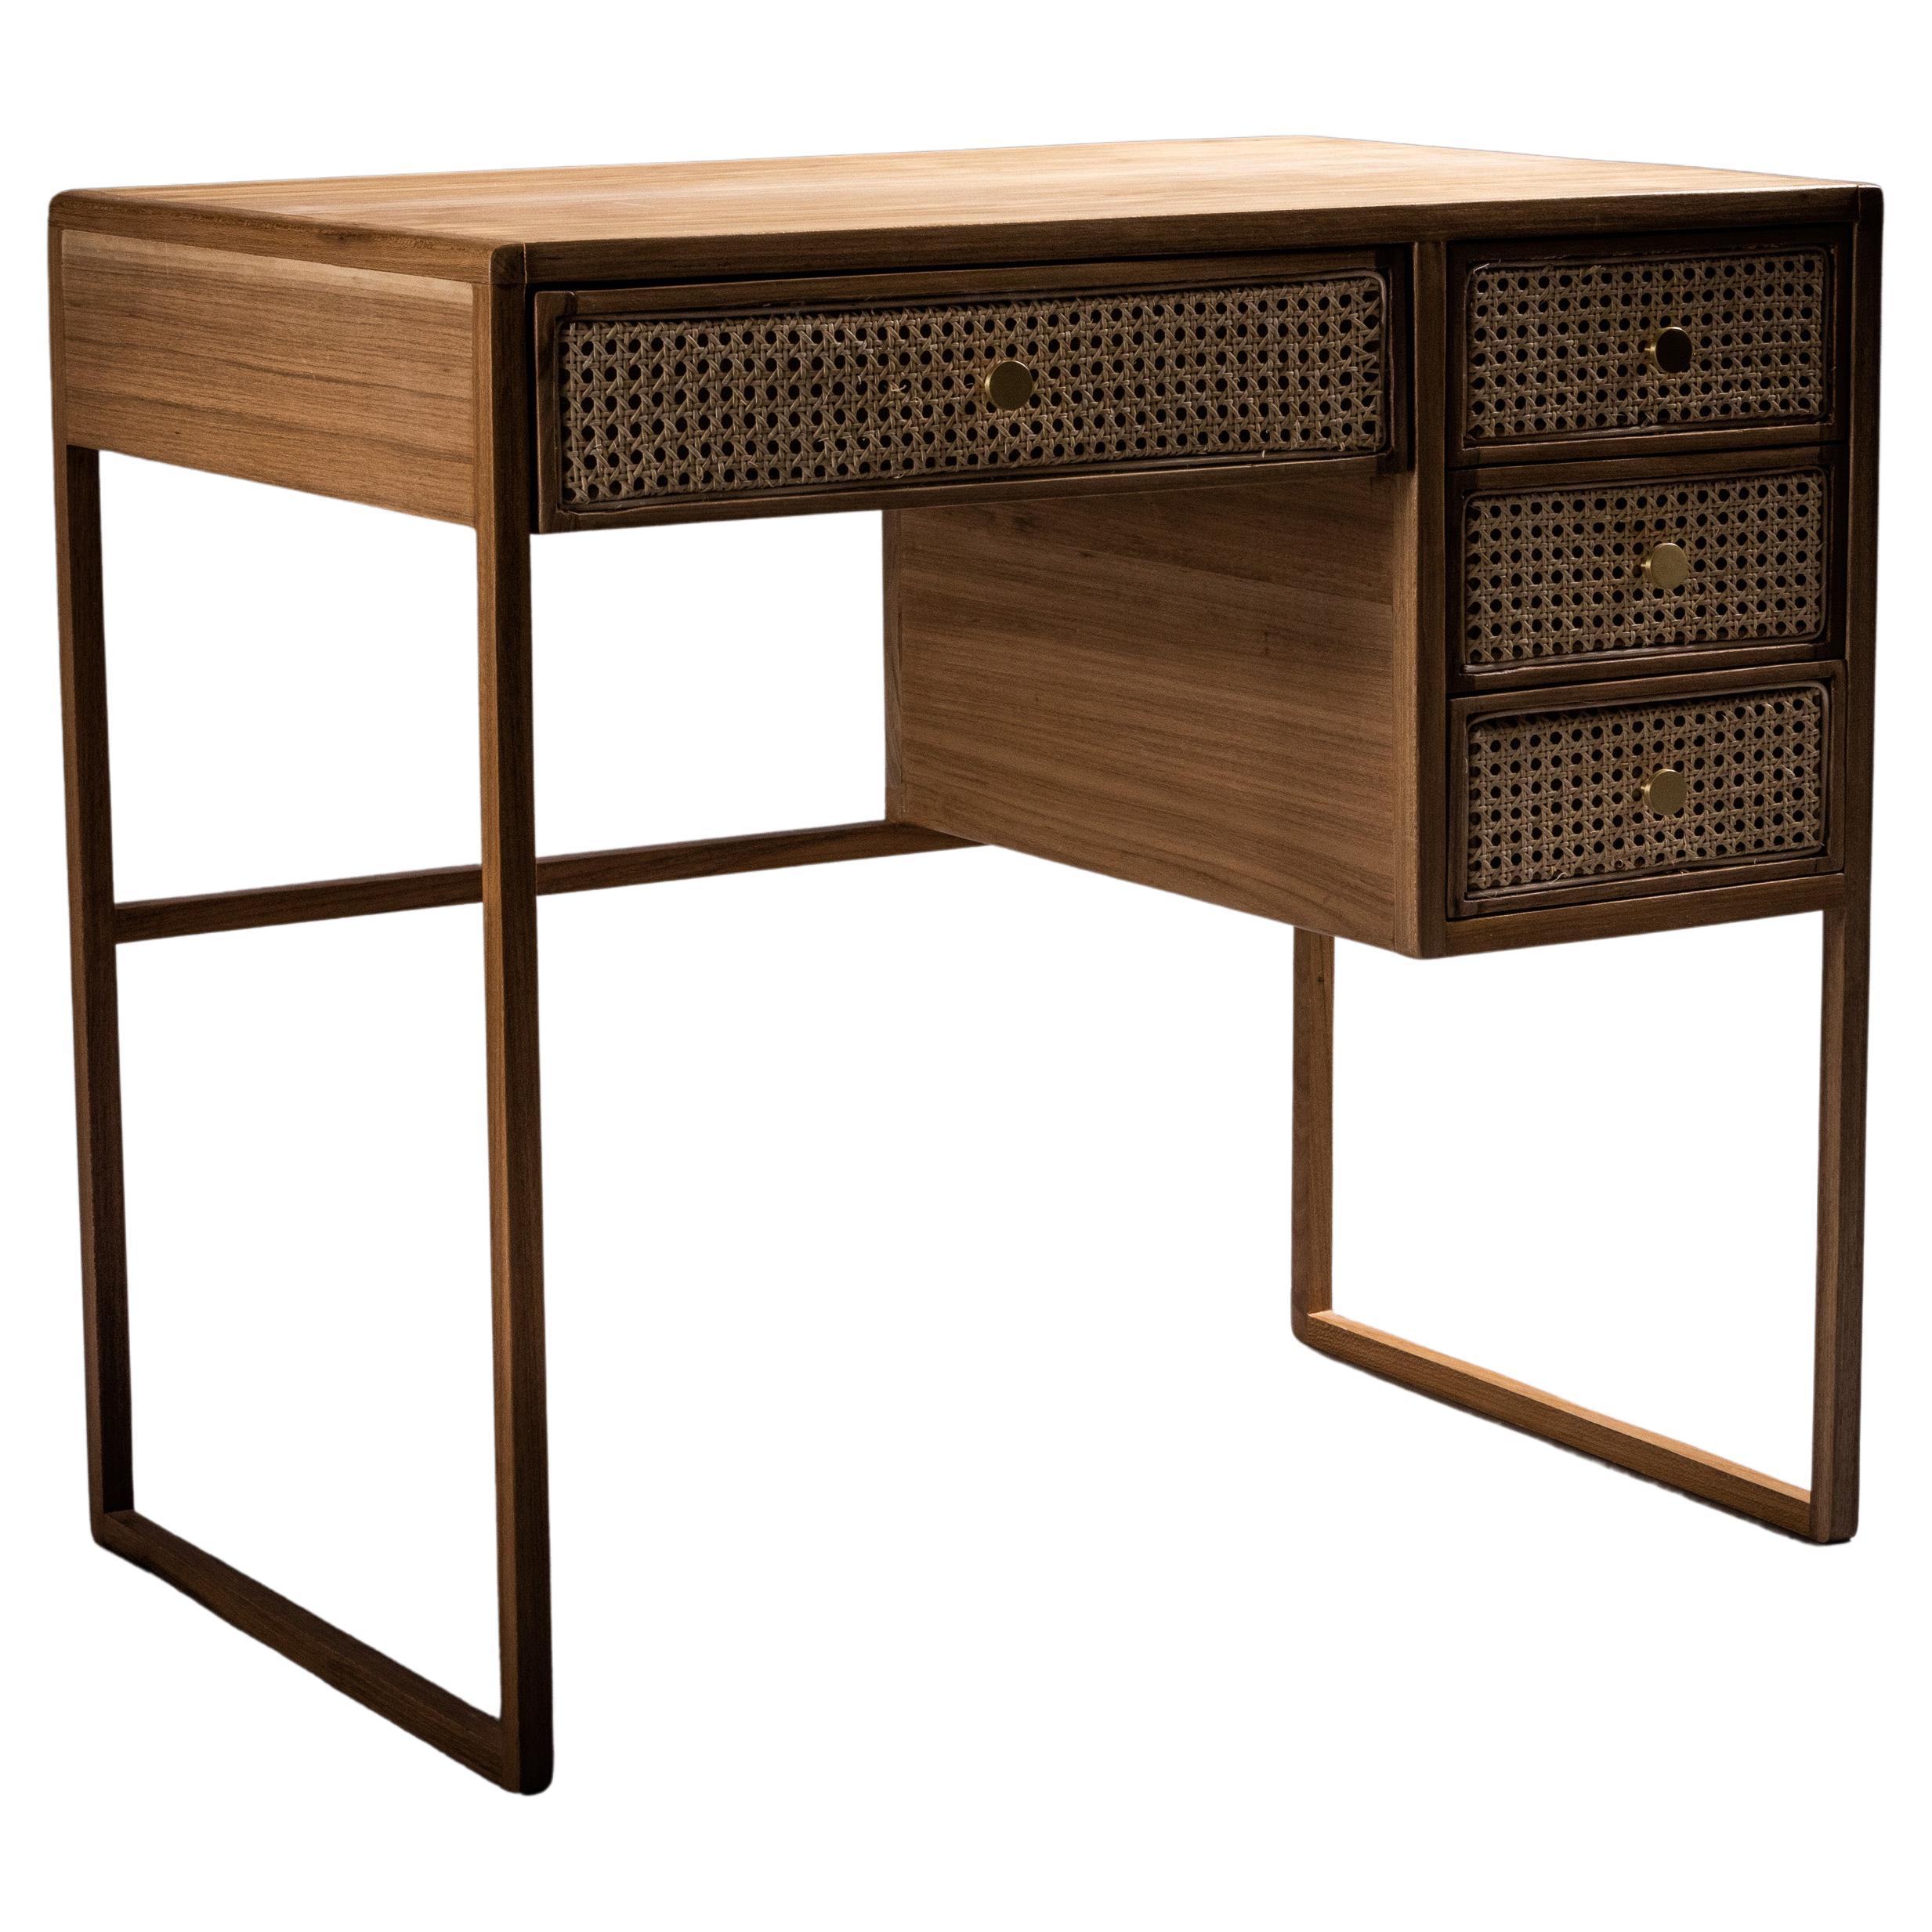 The Chiquita Desk. Brazilian Solid Wood and Natural Straws. For Sale